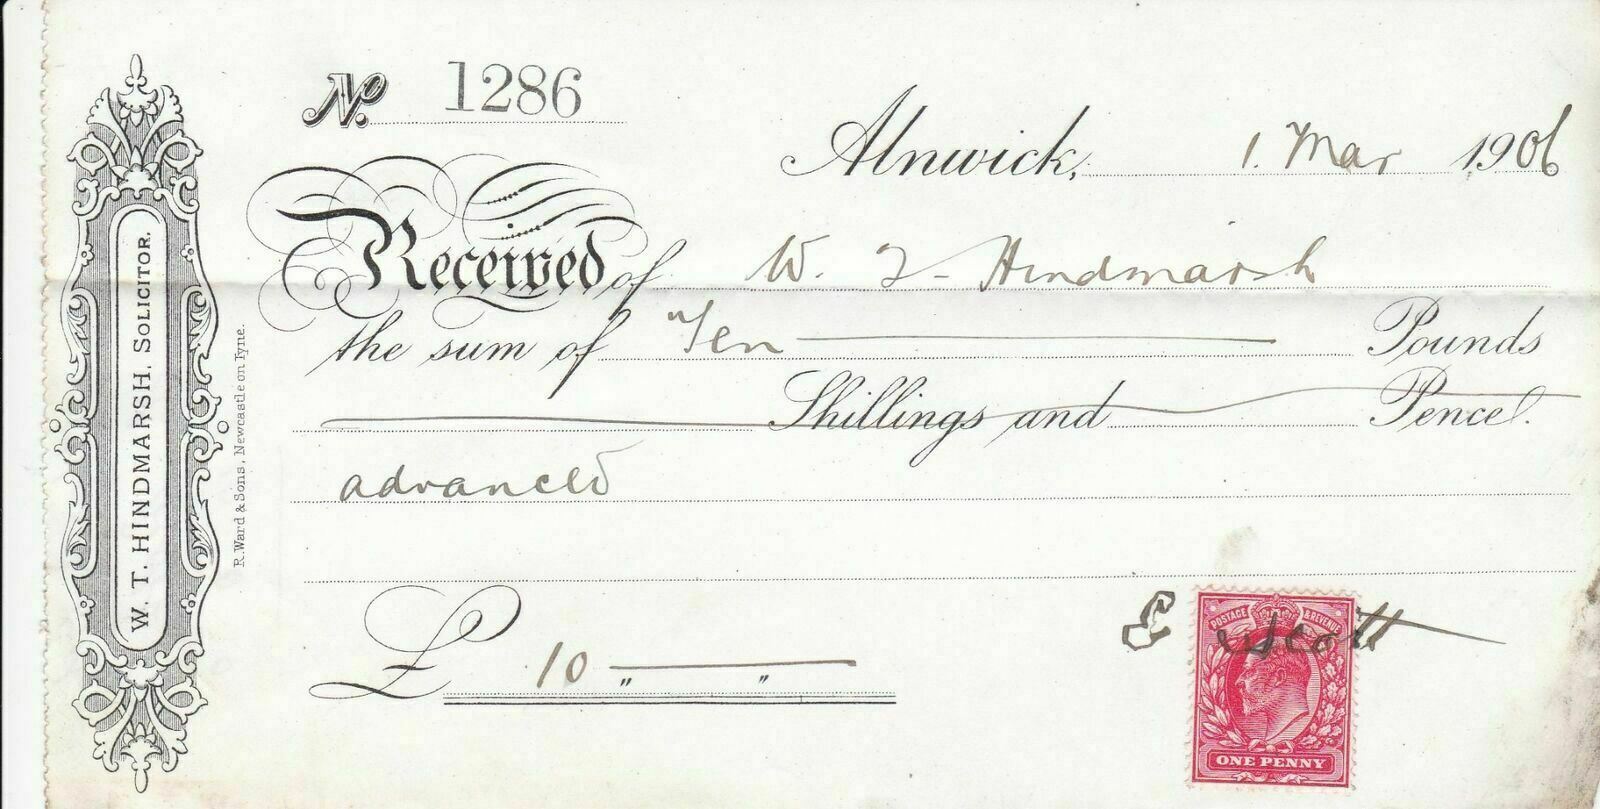 Received of W.Hindmarsh Alnwick 1906 Ten Pounds Advanced Stamp Receipt Ref 38999